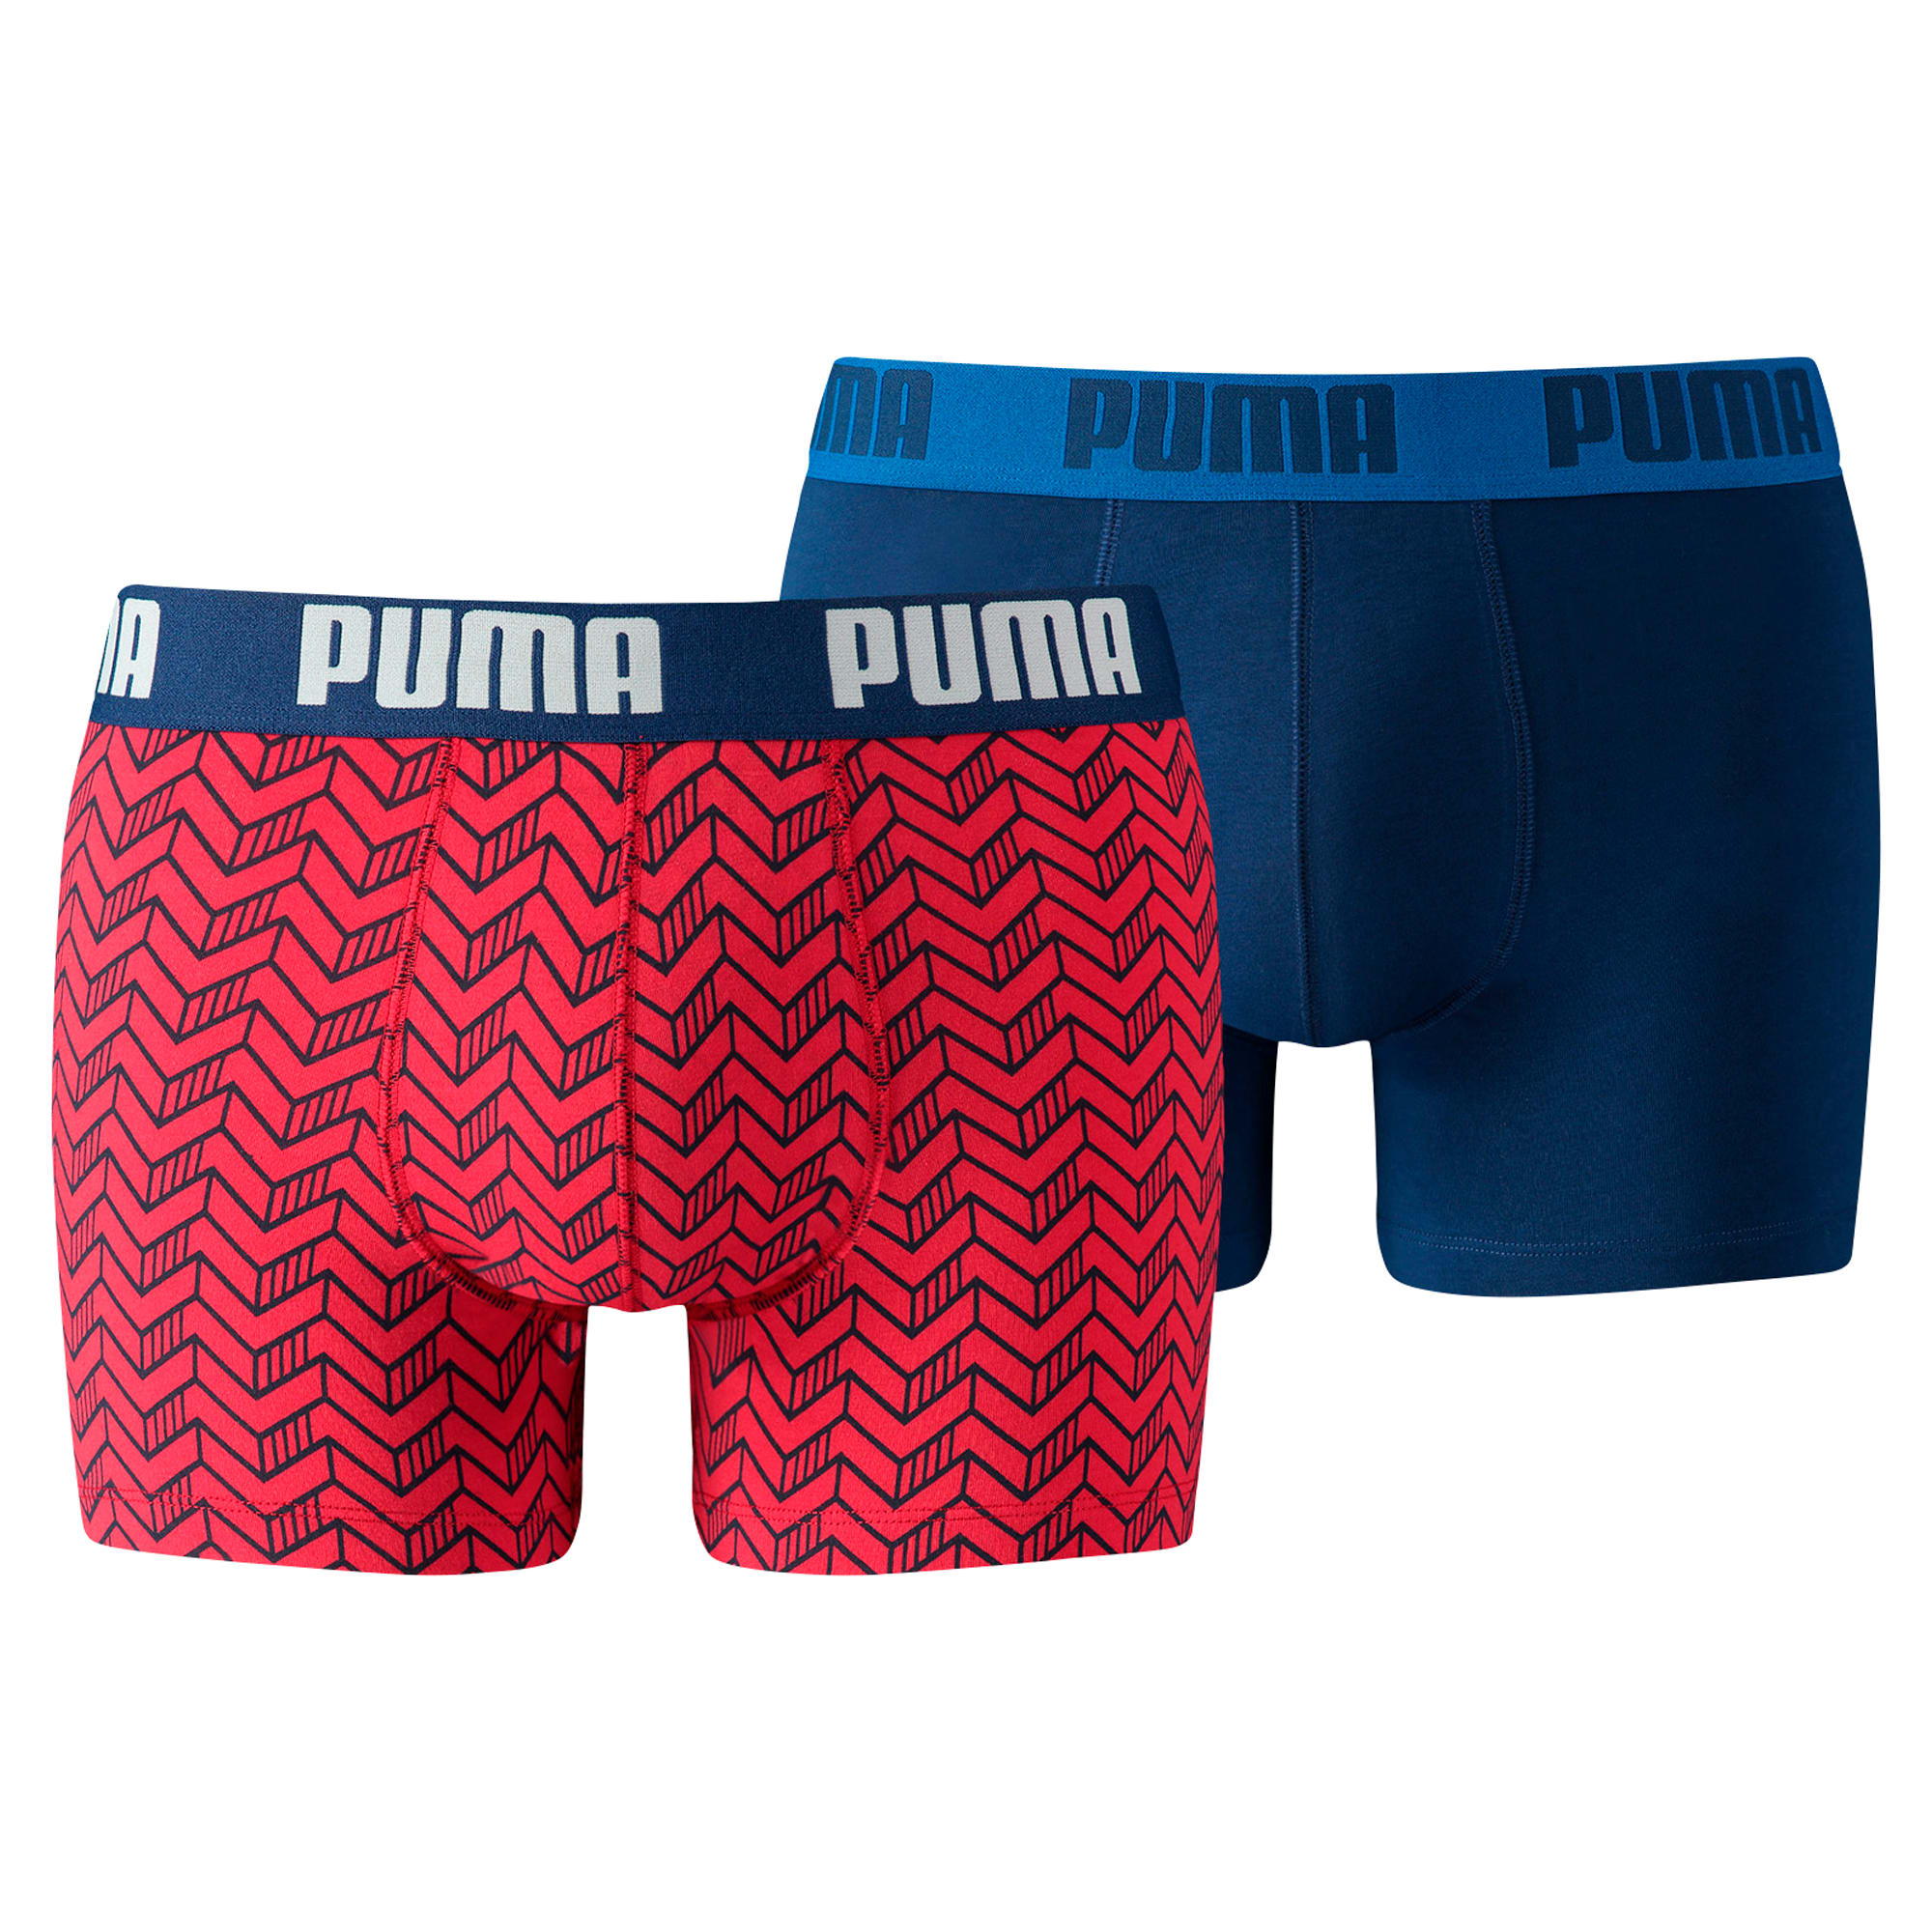 Graphic Print Boxer Shorts 2 Pack 